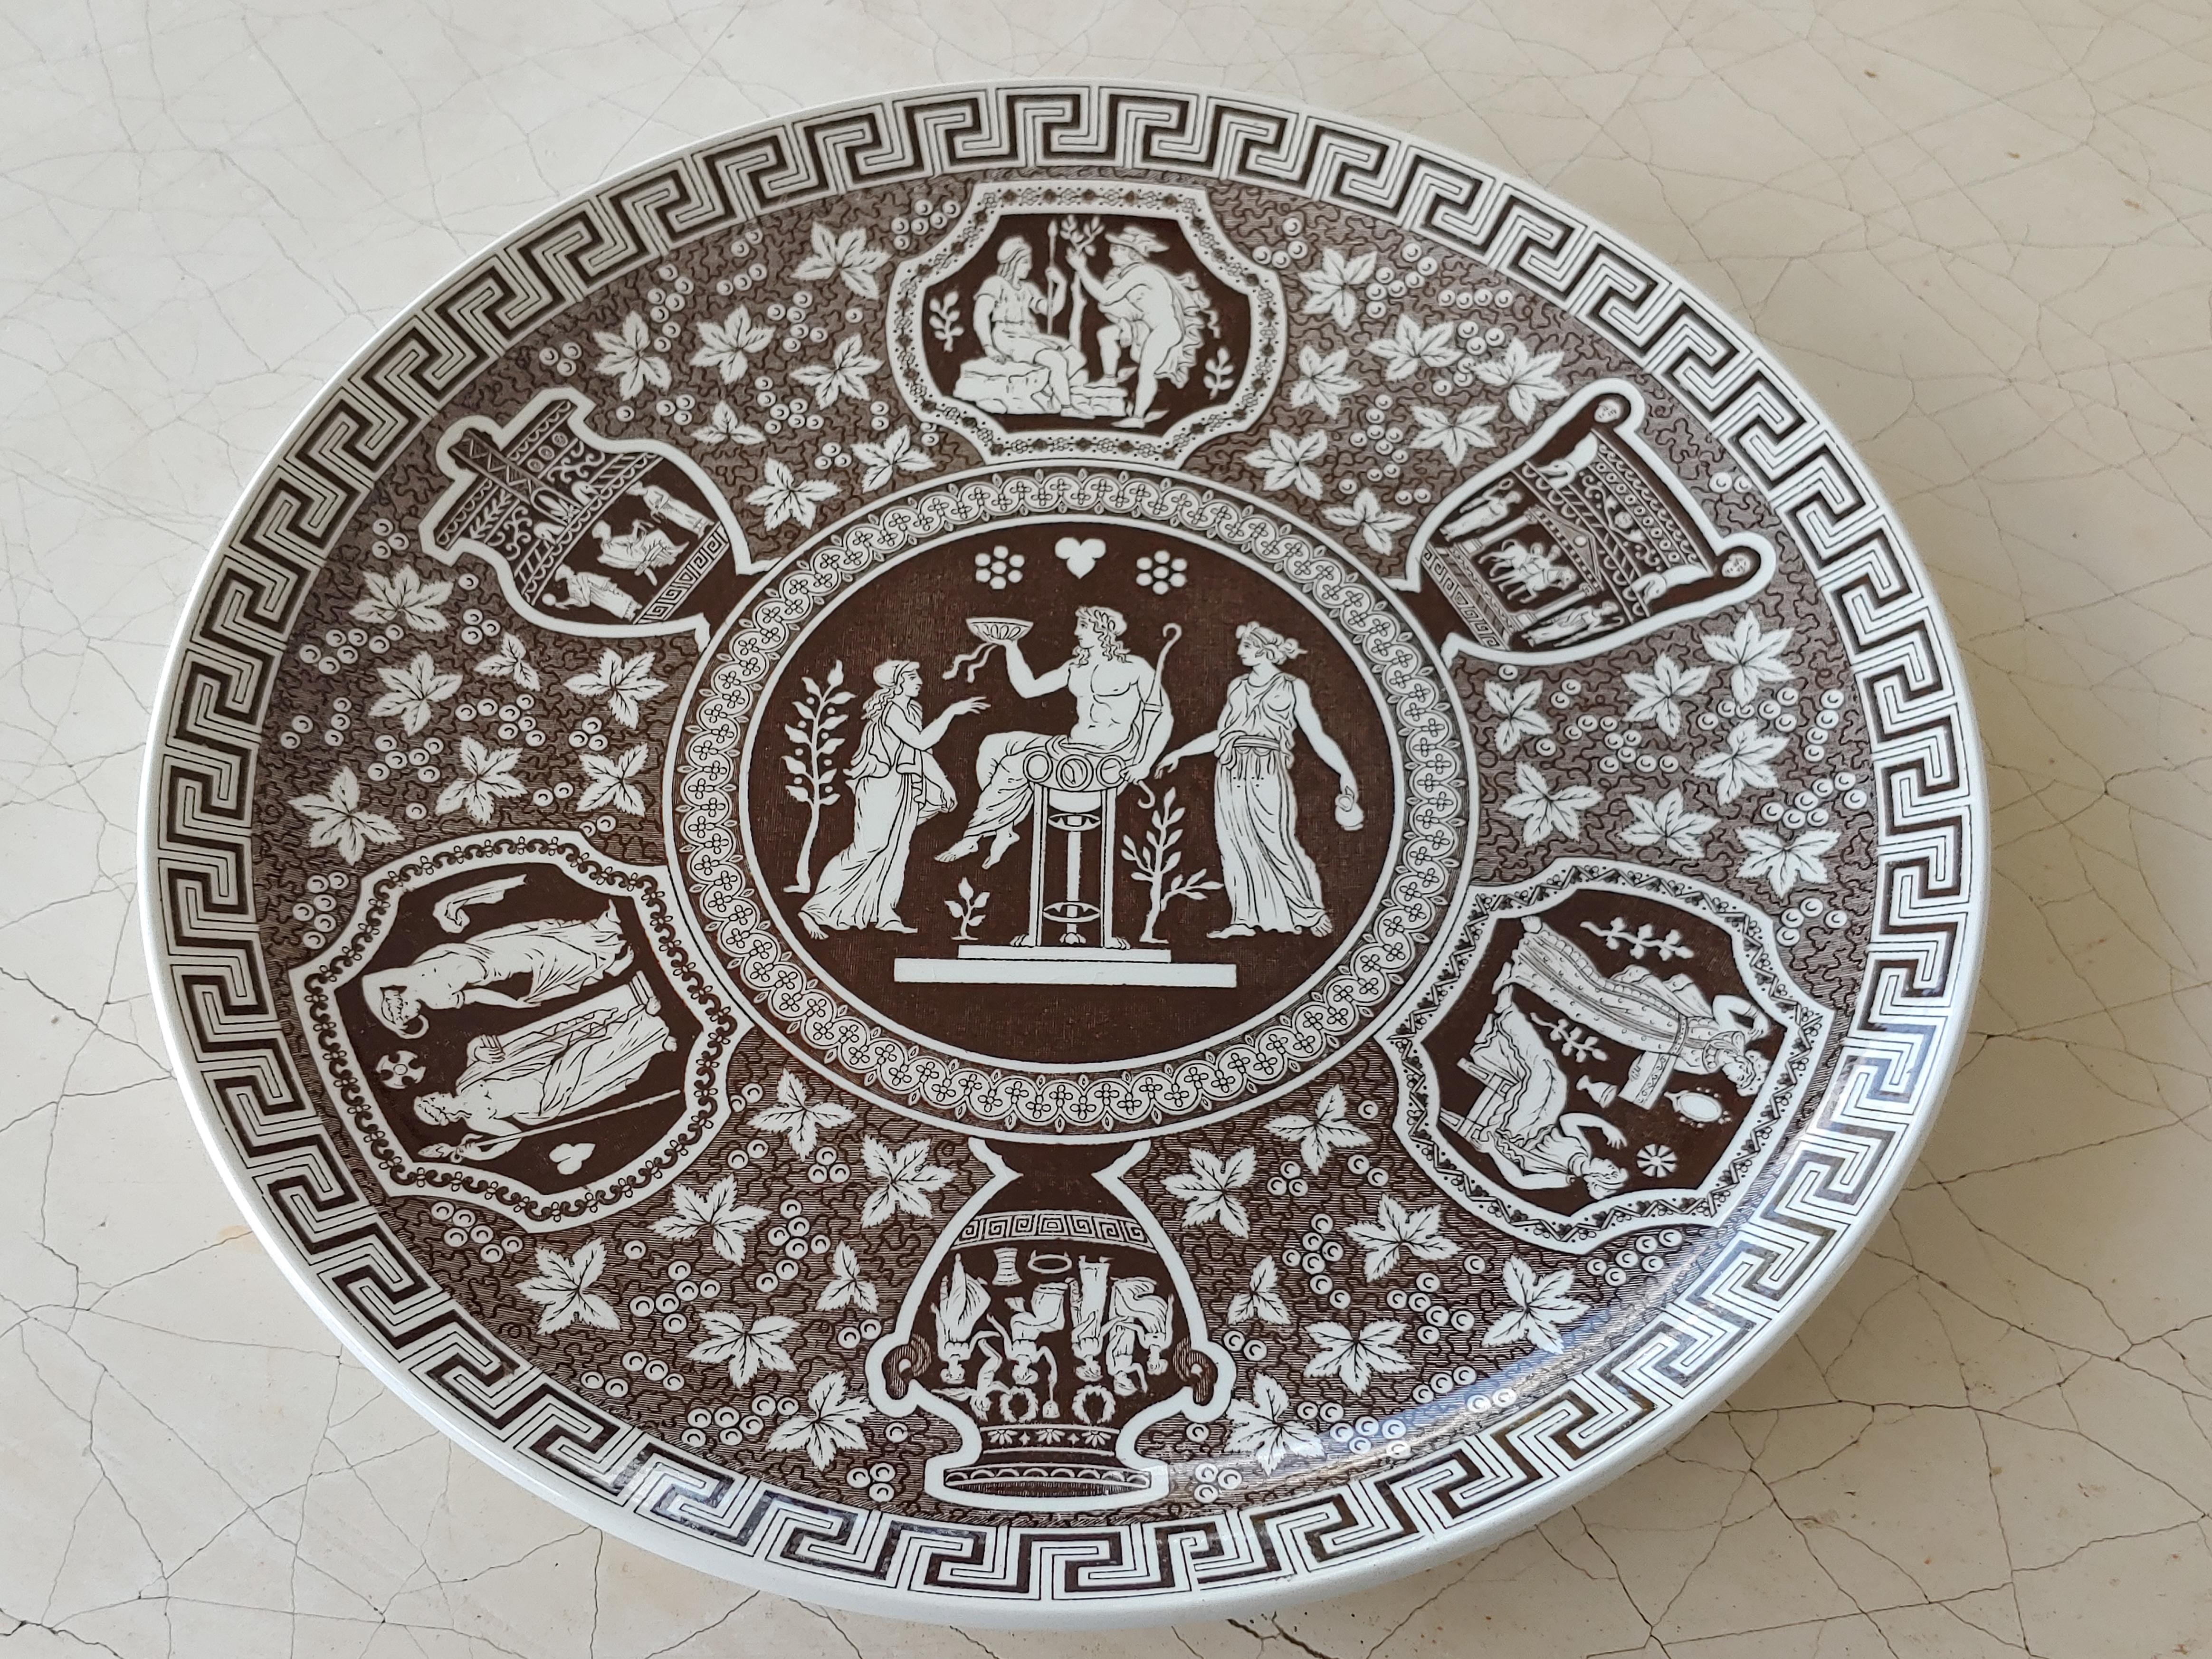 Set of 12 English Copeland Spode plates in brown Greek pattern, depicting Classical scenes with greek-key edging and floral background. 

Letter 